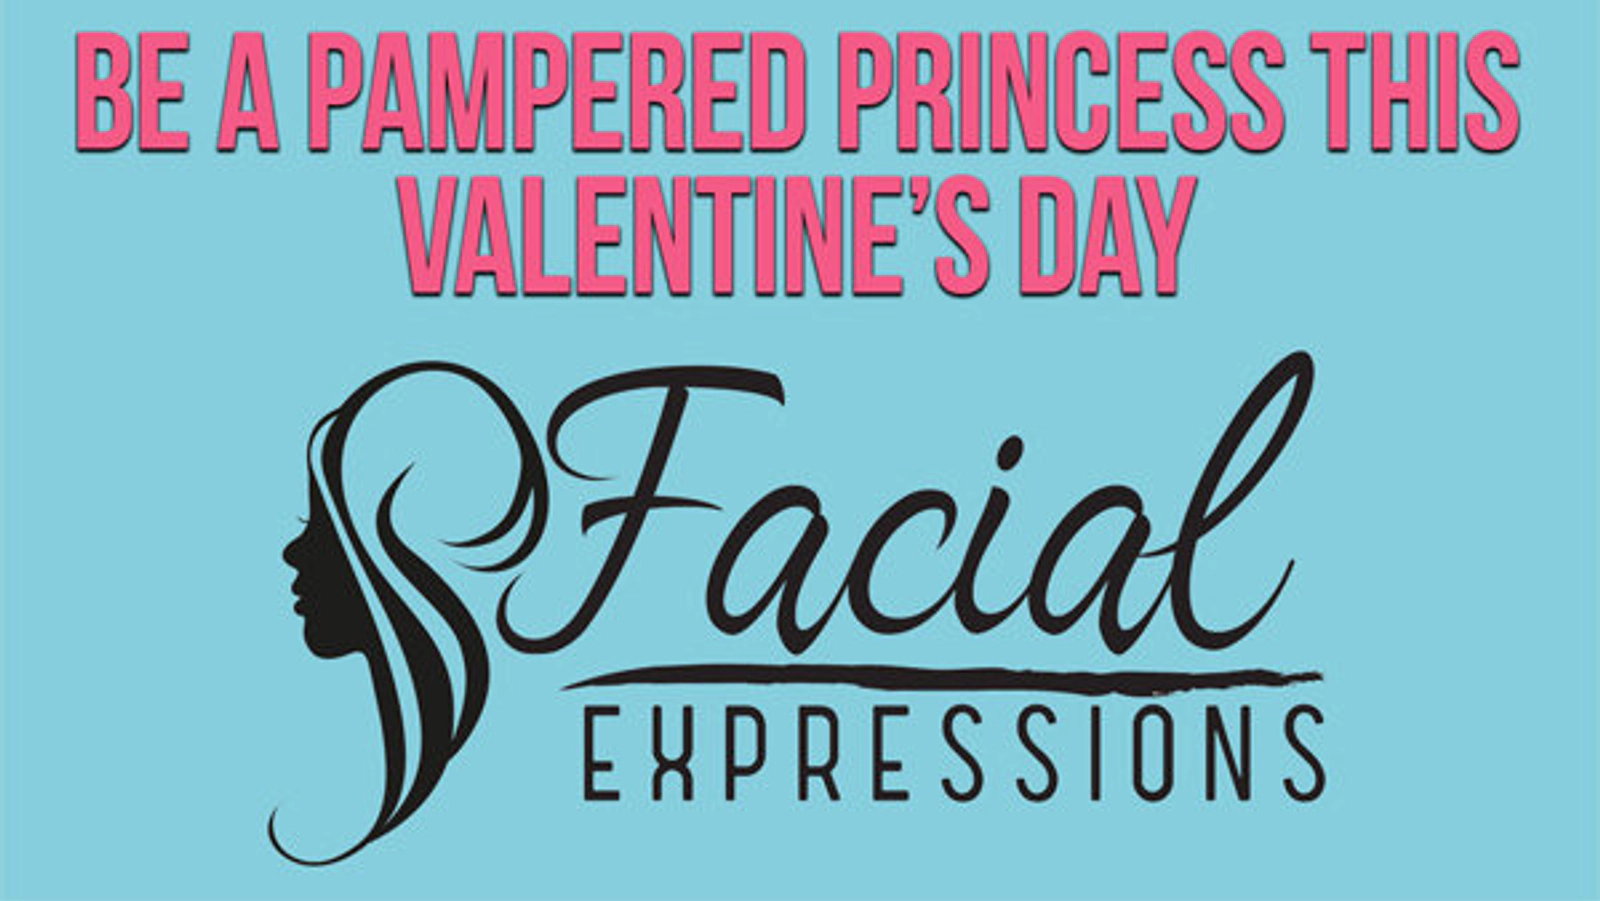 Be A Pampered Princess This Valentine's Day! - Thumbnail Image